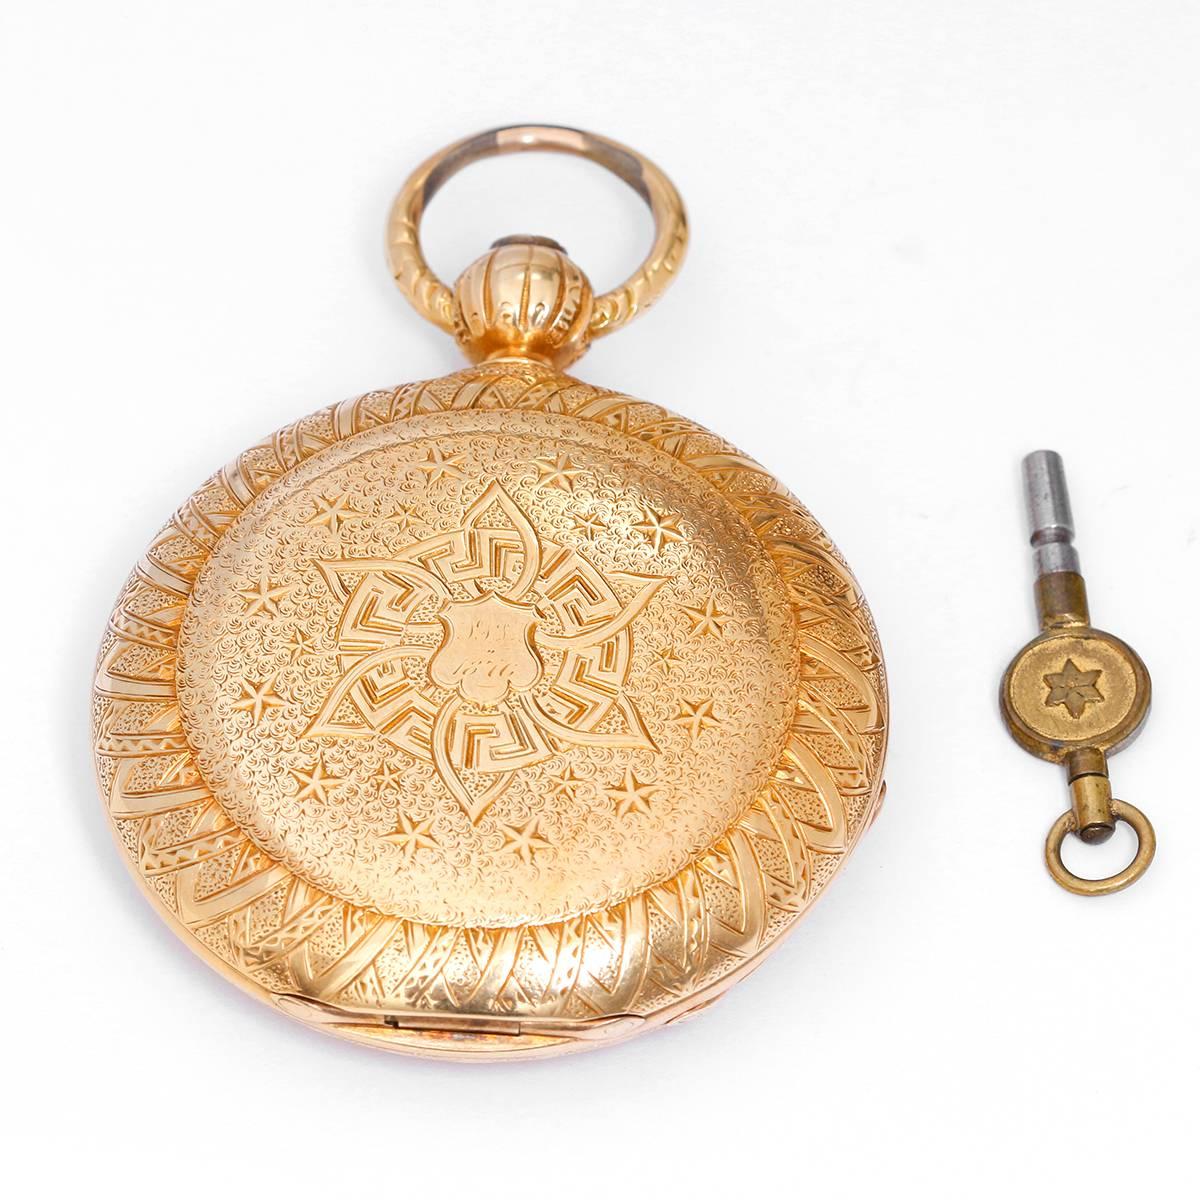 engrave pocket watch